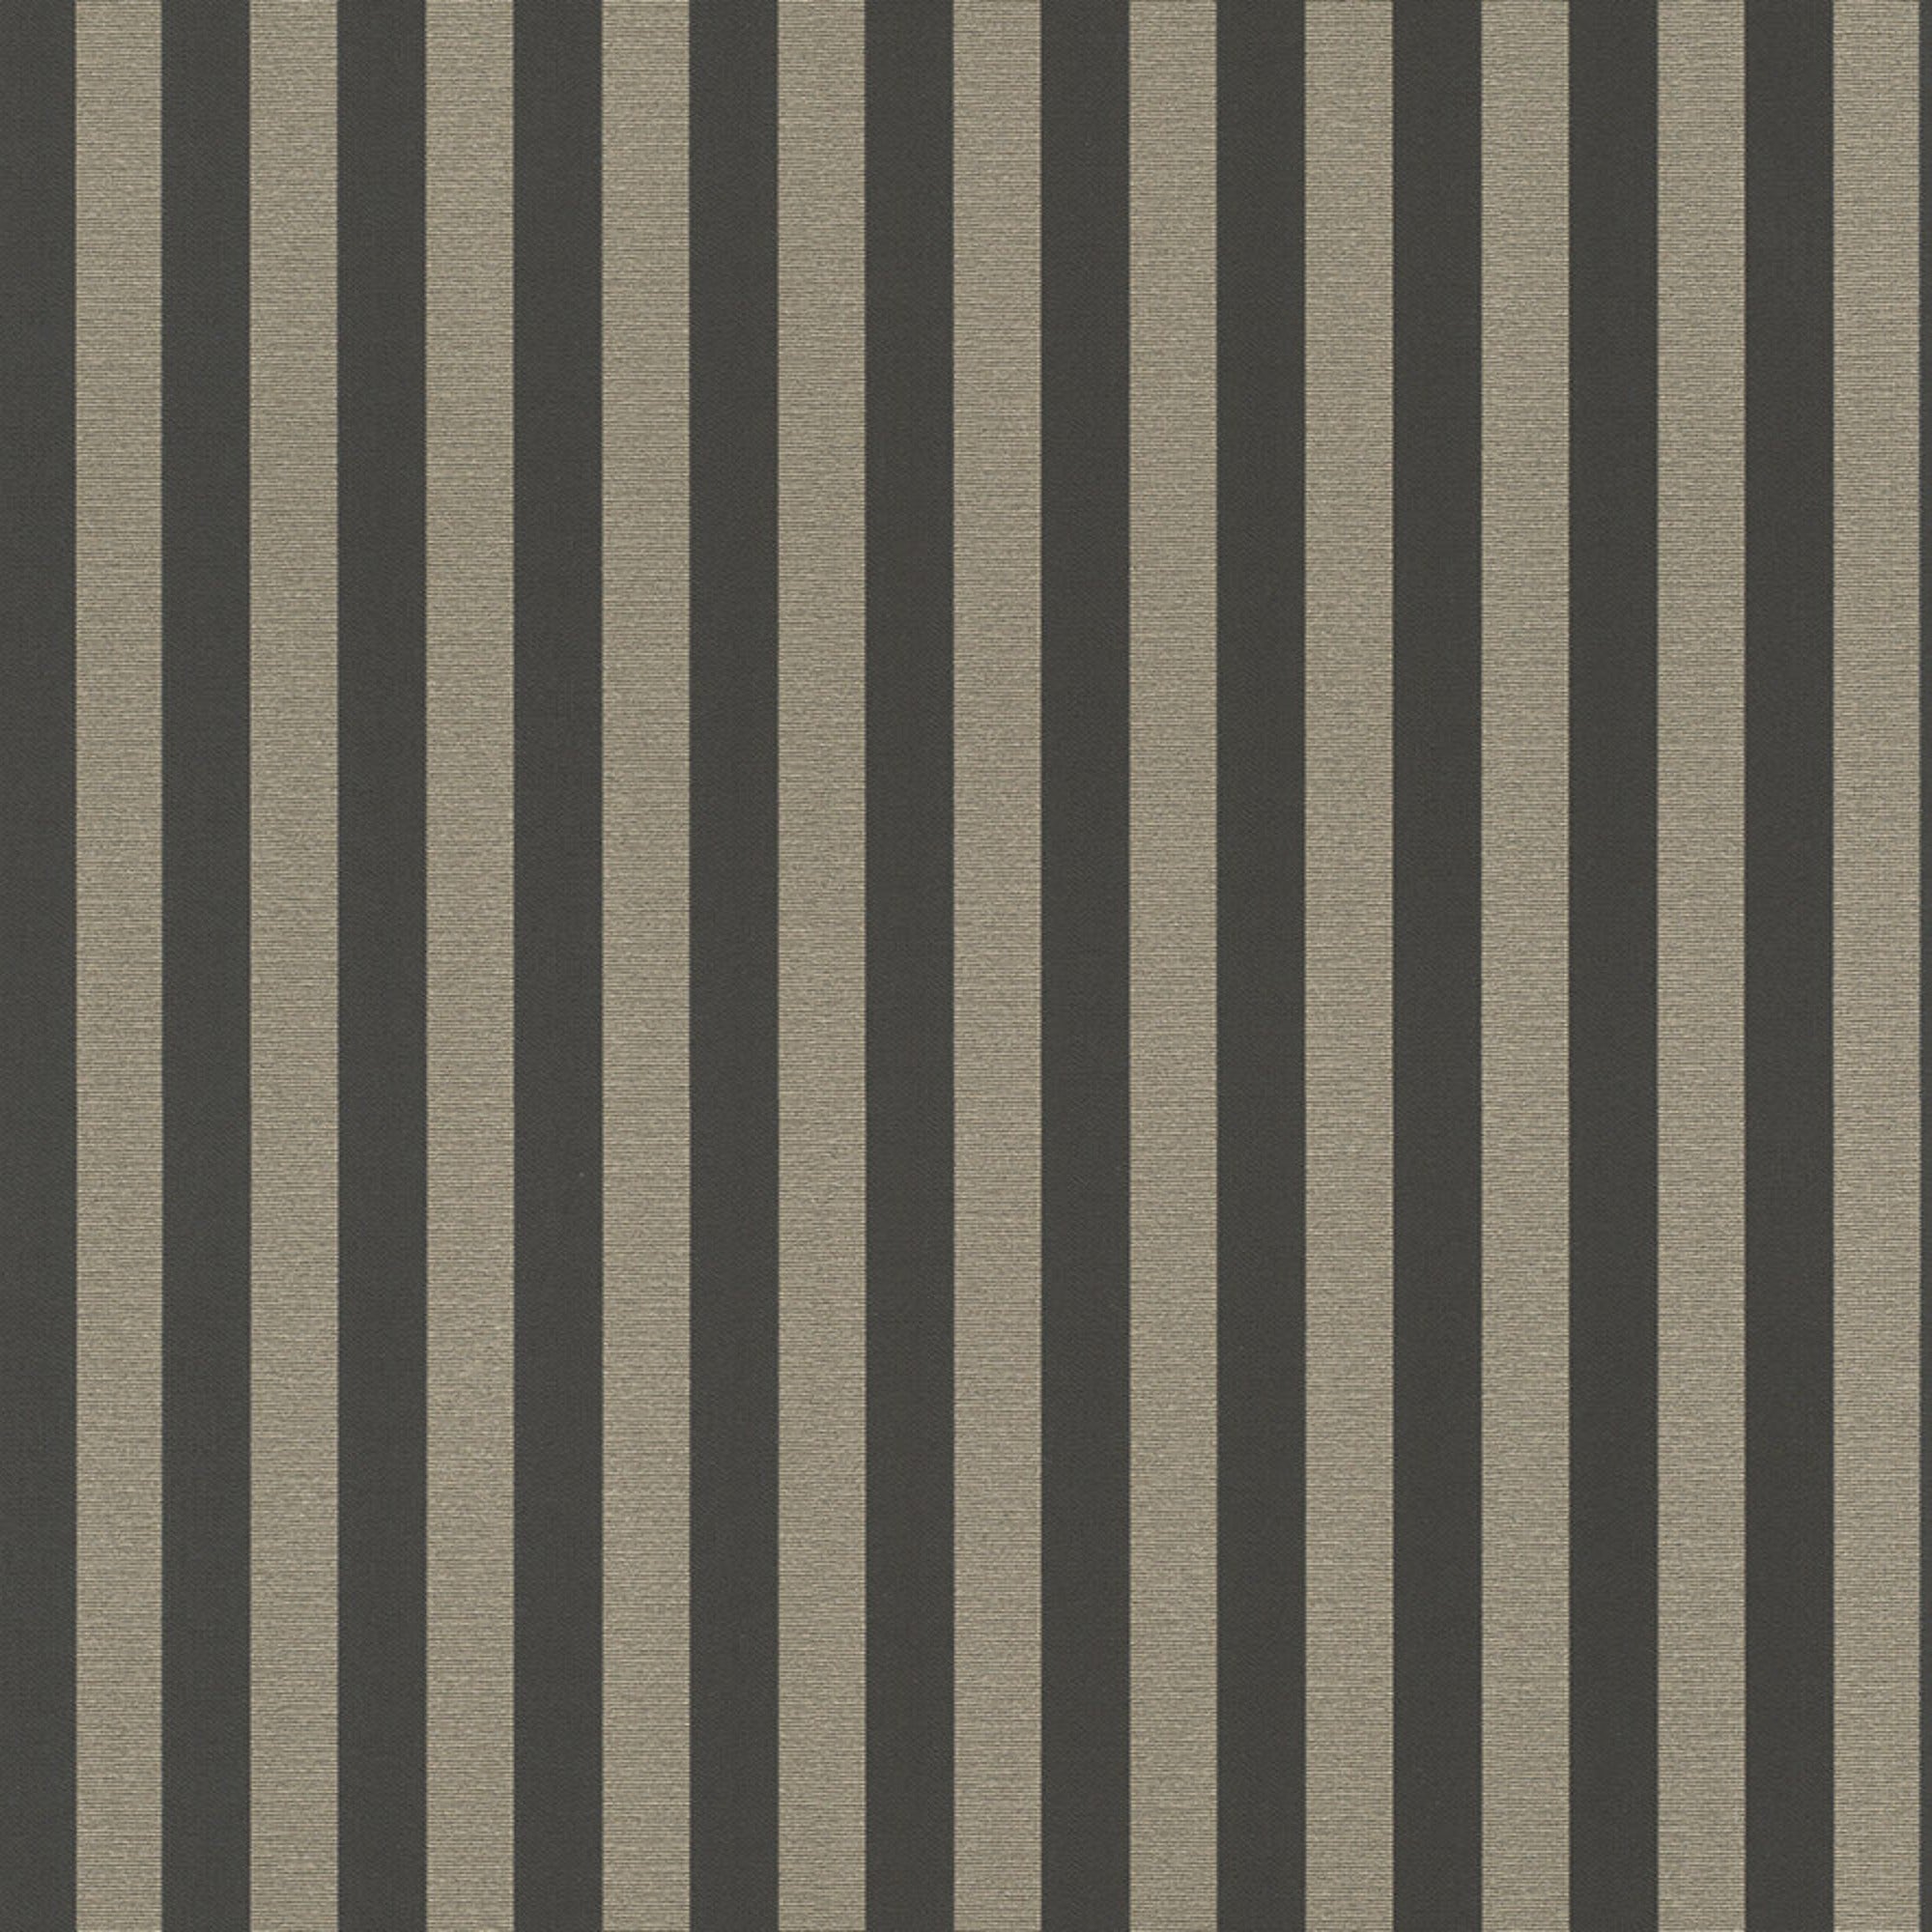 Trianon Stripe Brown / Charcoal | WonderWall by Nobletts